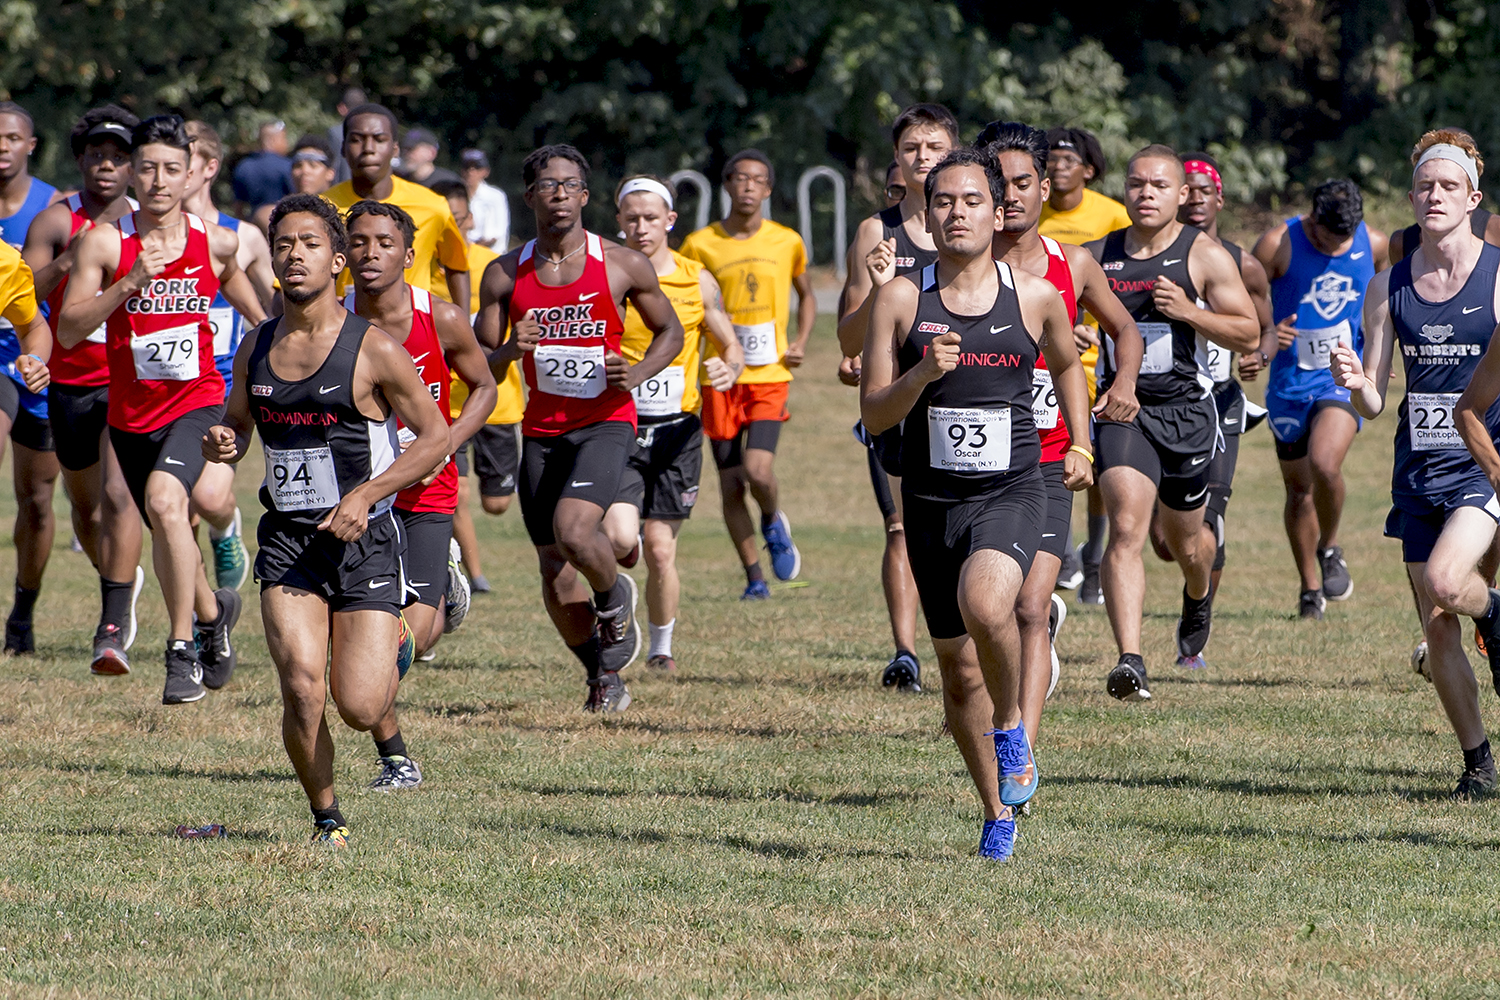 MEN'S CROSS COUNTRY PARTICIPATE IN FIFTH ANNUAL INTER-REGIONAL BORDER BATTLE